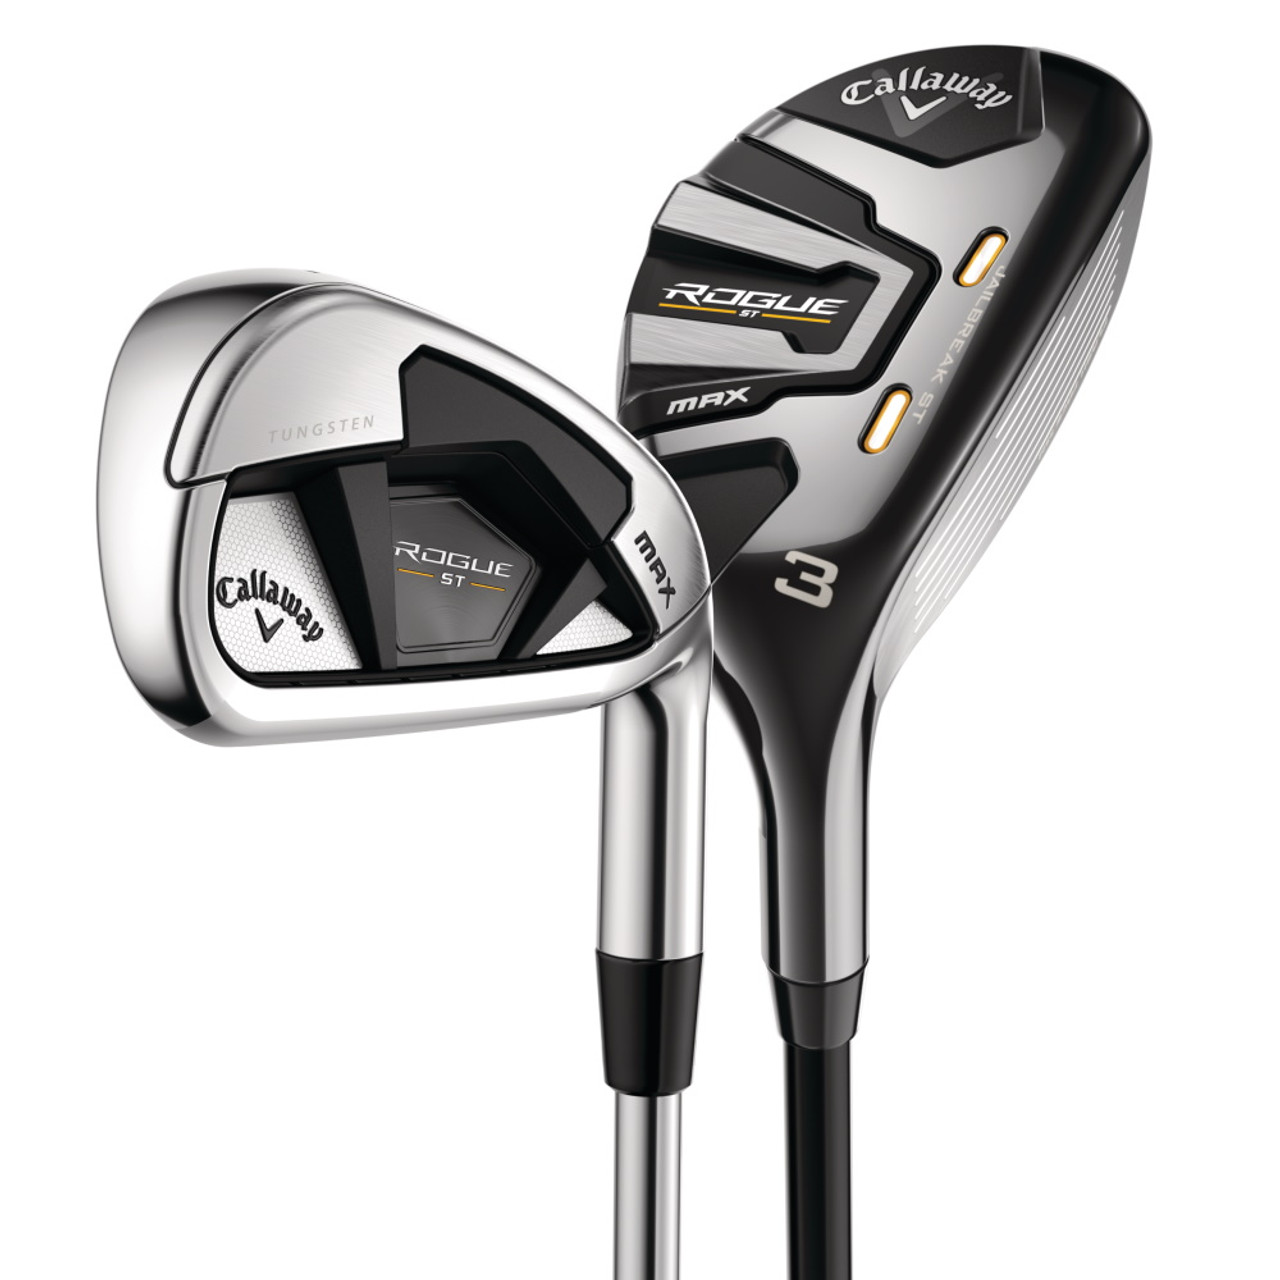 Callaway Rogue ST Max Combo Irons | Steel Iron Shafts